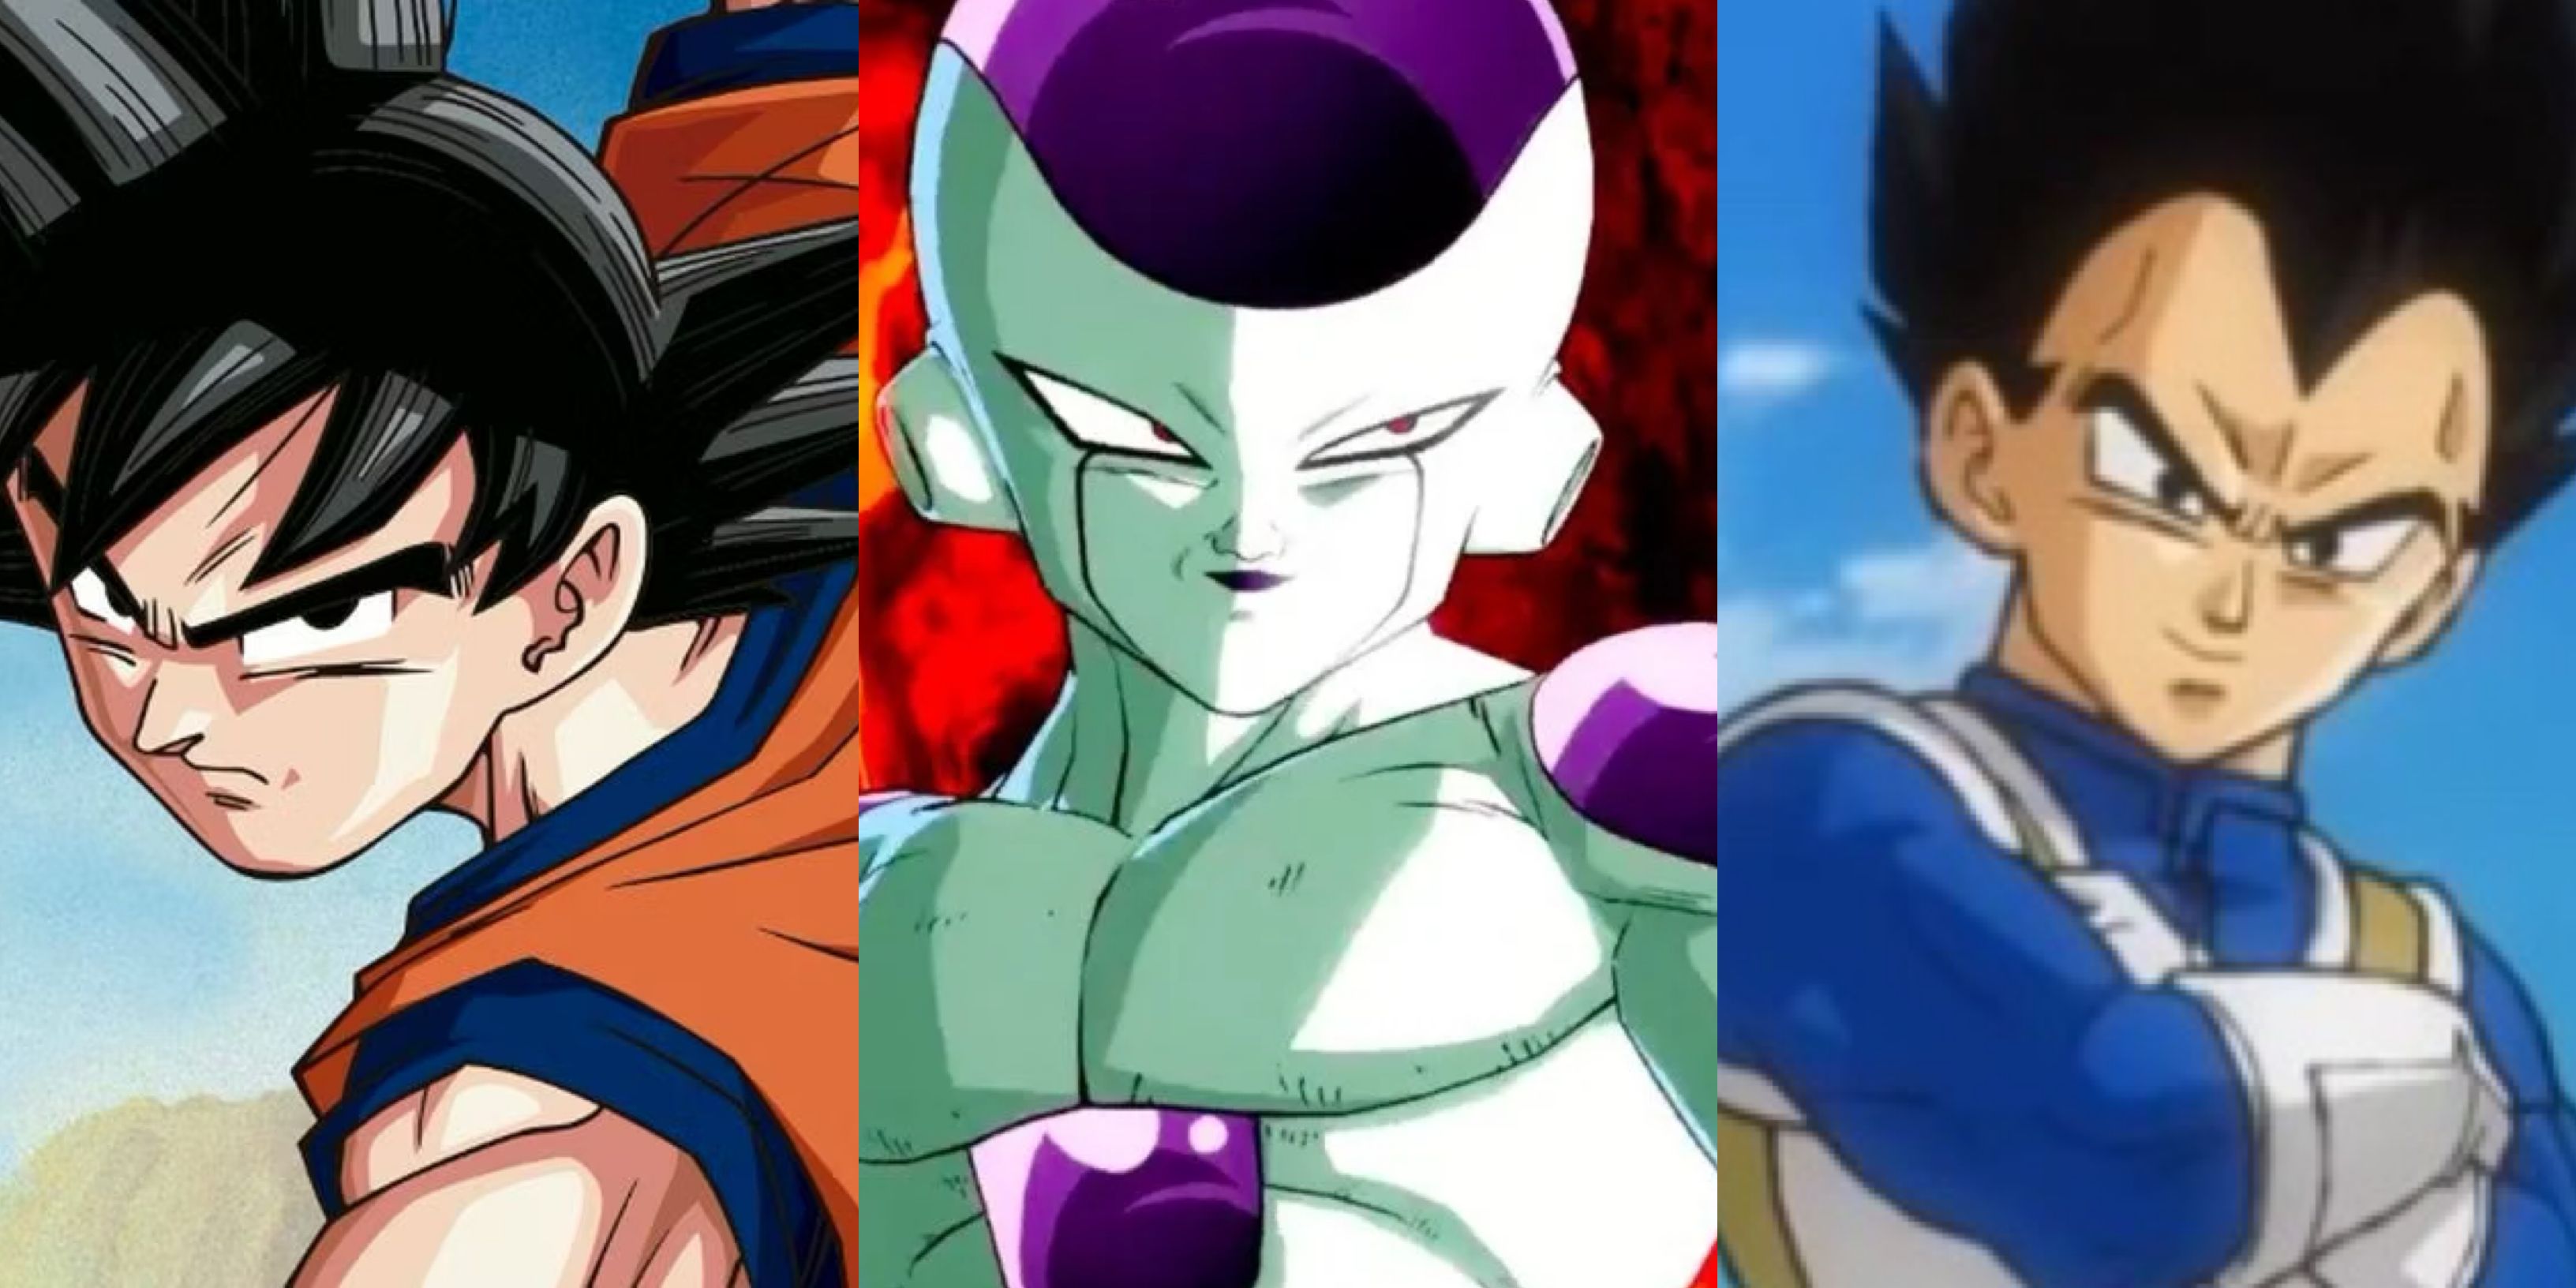 Dragon Ball Characters Who Are Better In The Anime: Goku (left), Frieza (middle), and Vegeta (right)